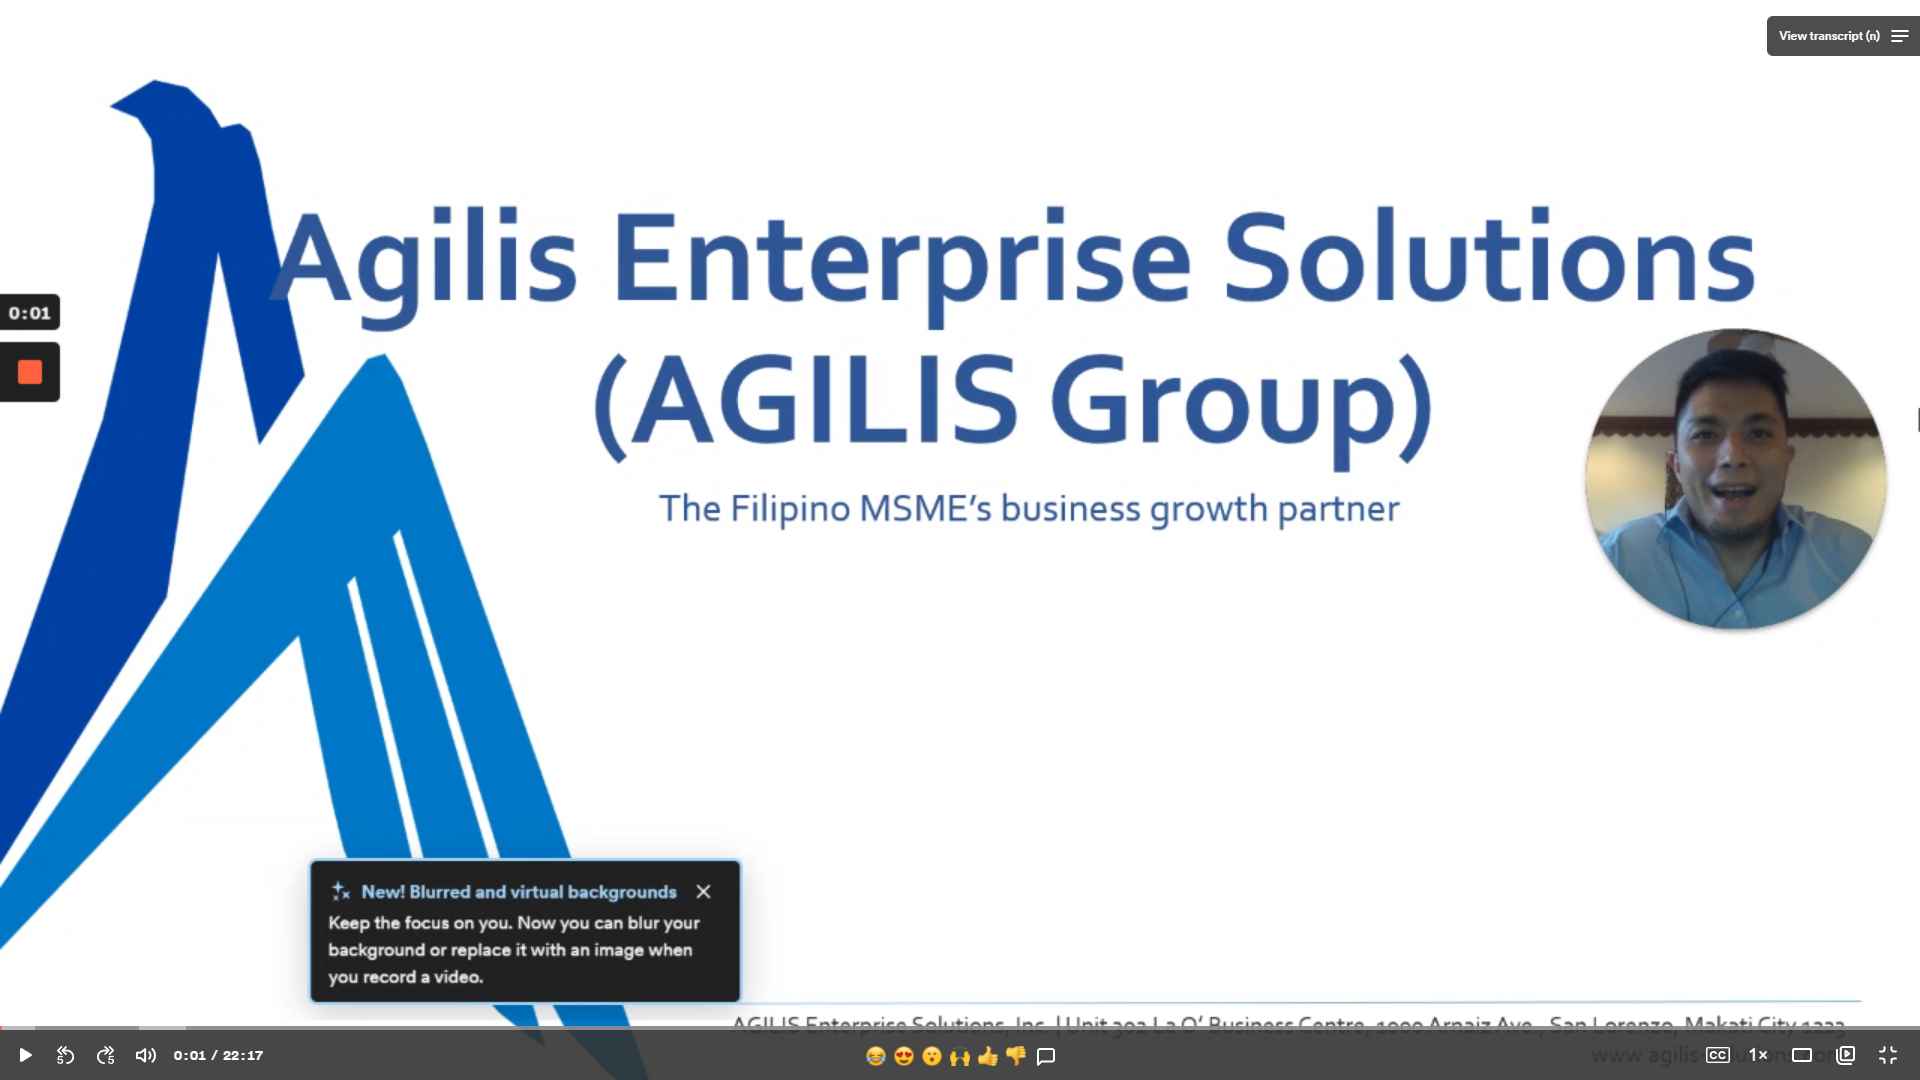 Who is Agilis? (Requirement 1)